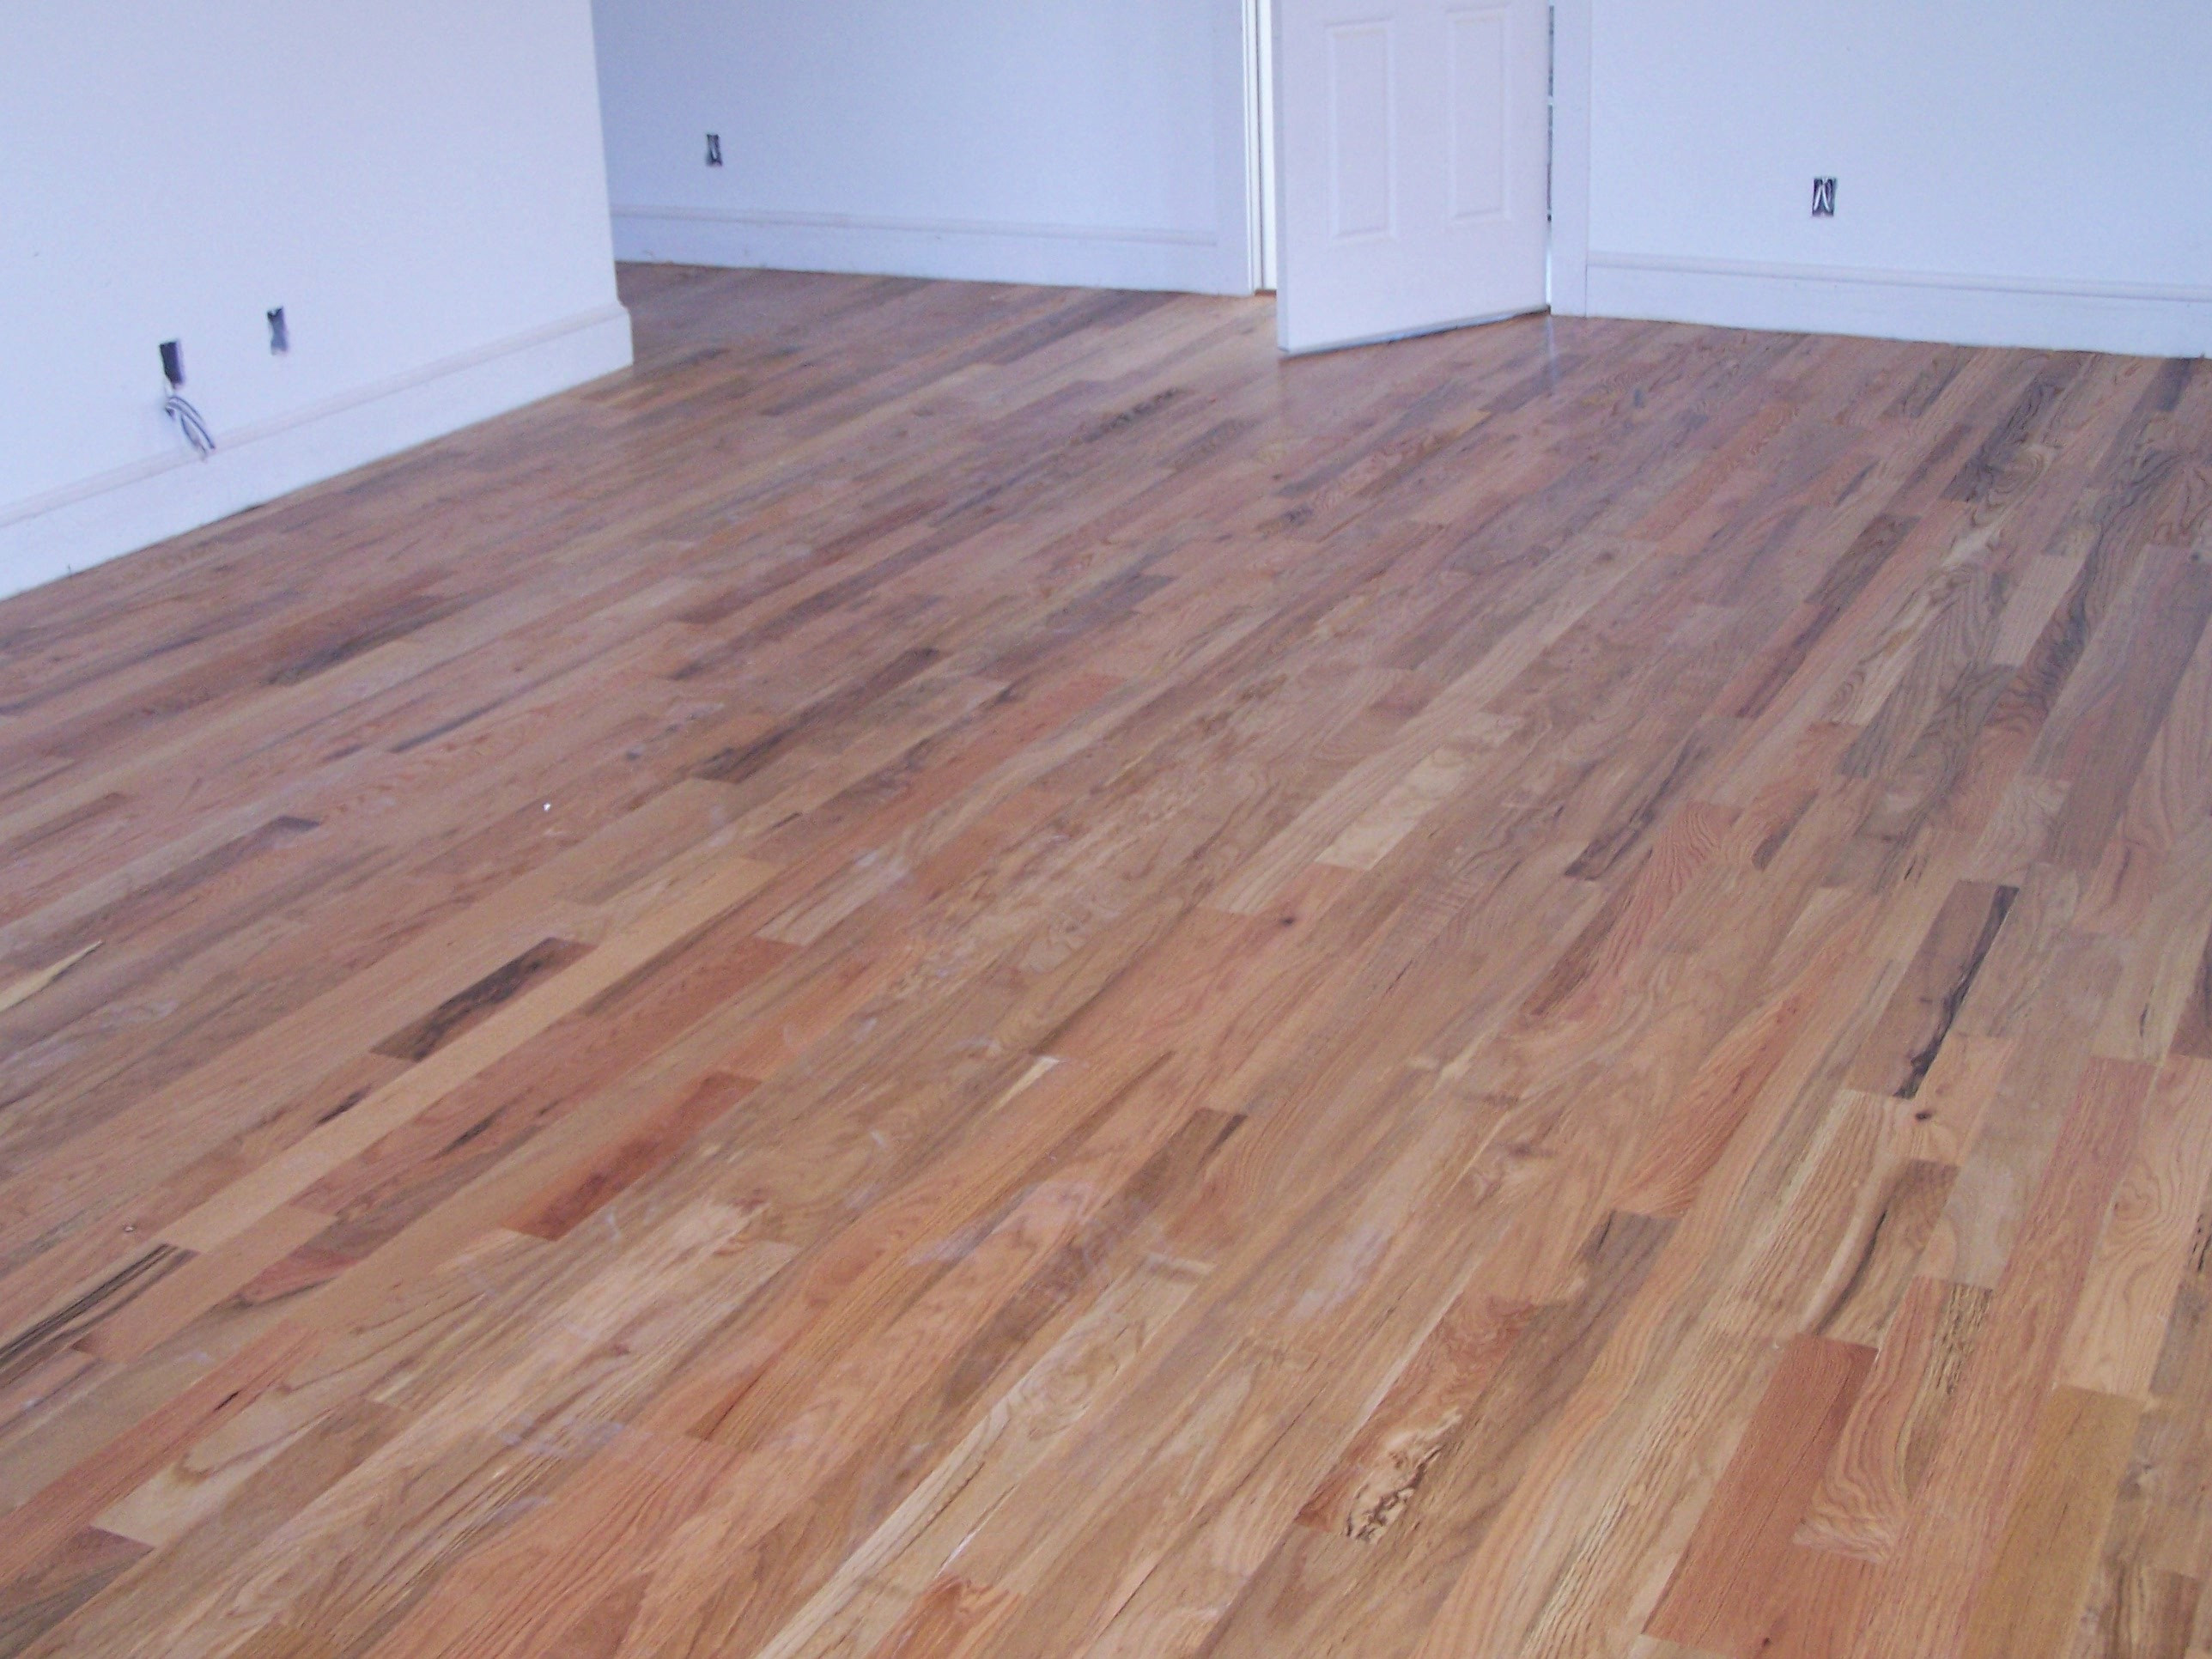 21 Best Hardwood Floor Finishes Pictures 2024 free download hardwood floor finishes pictures of 13 best of cost of hardwood floors gallery dizpos com in cost of hardwood floors inspirational 50 new how to stain hardwood floors 50 s gallery of